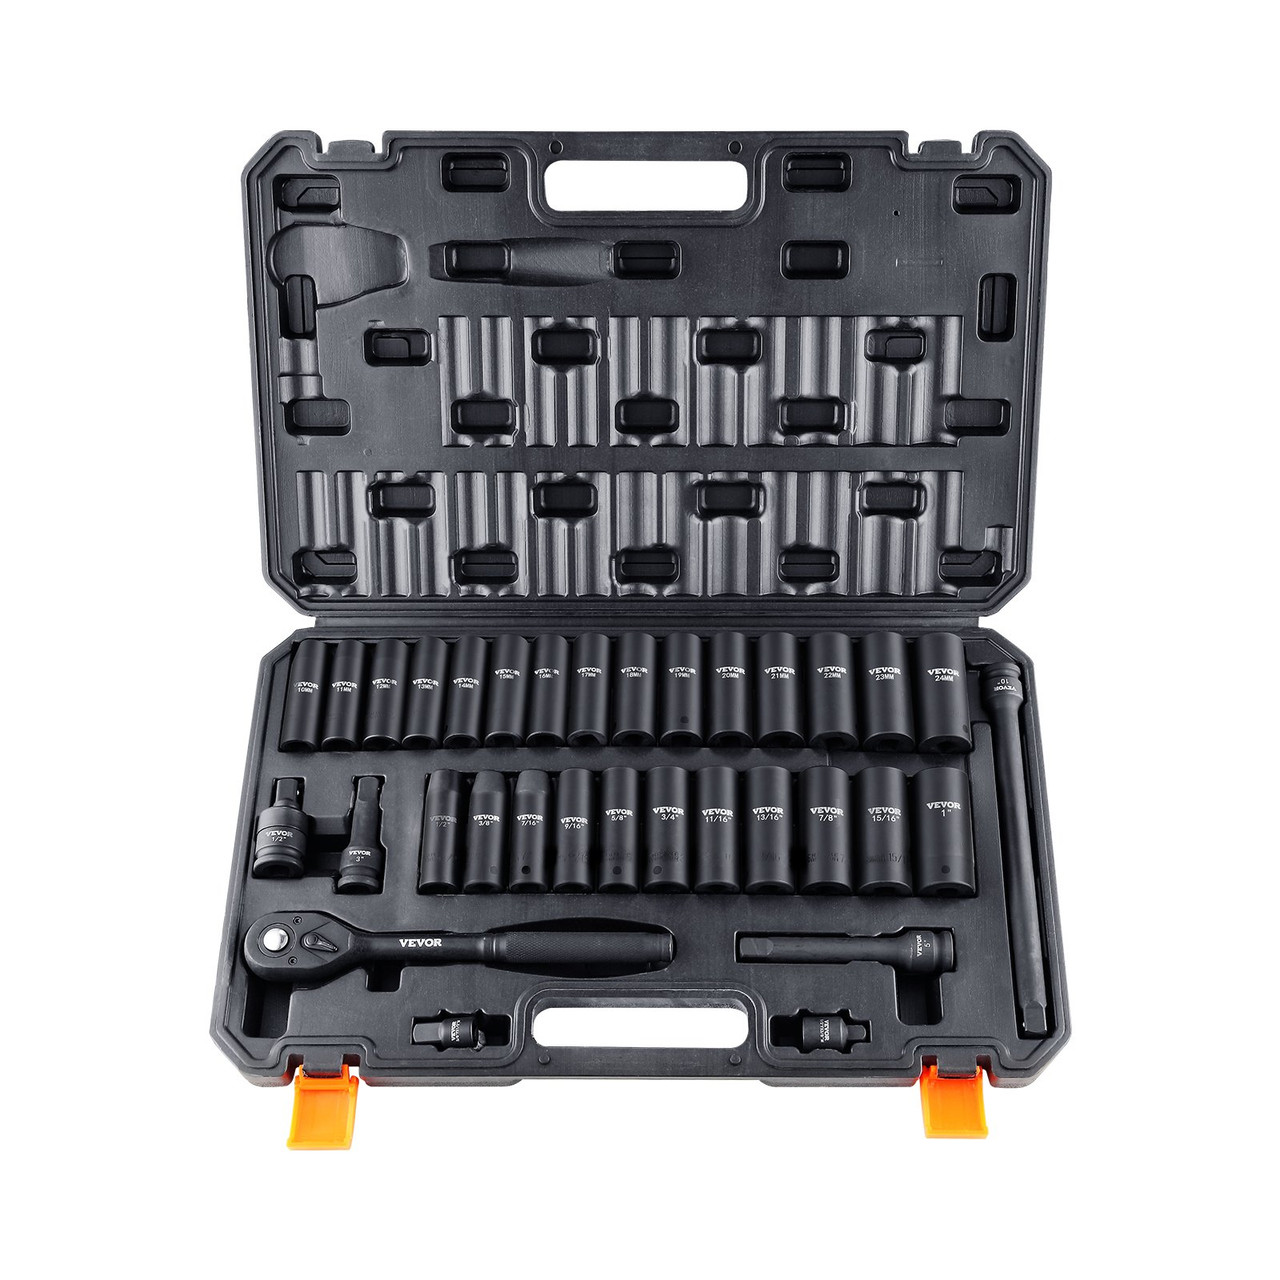 1/2" Drive Impact Socket Set, 33 Piece Socket Set SAE 3/8"-1" and Metric 10-24mm, 6 Point Cr-V Alloy Steel for Auto Repair, Easy-to-Read Size Markings, Rugged Construction, Includes Storage Case